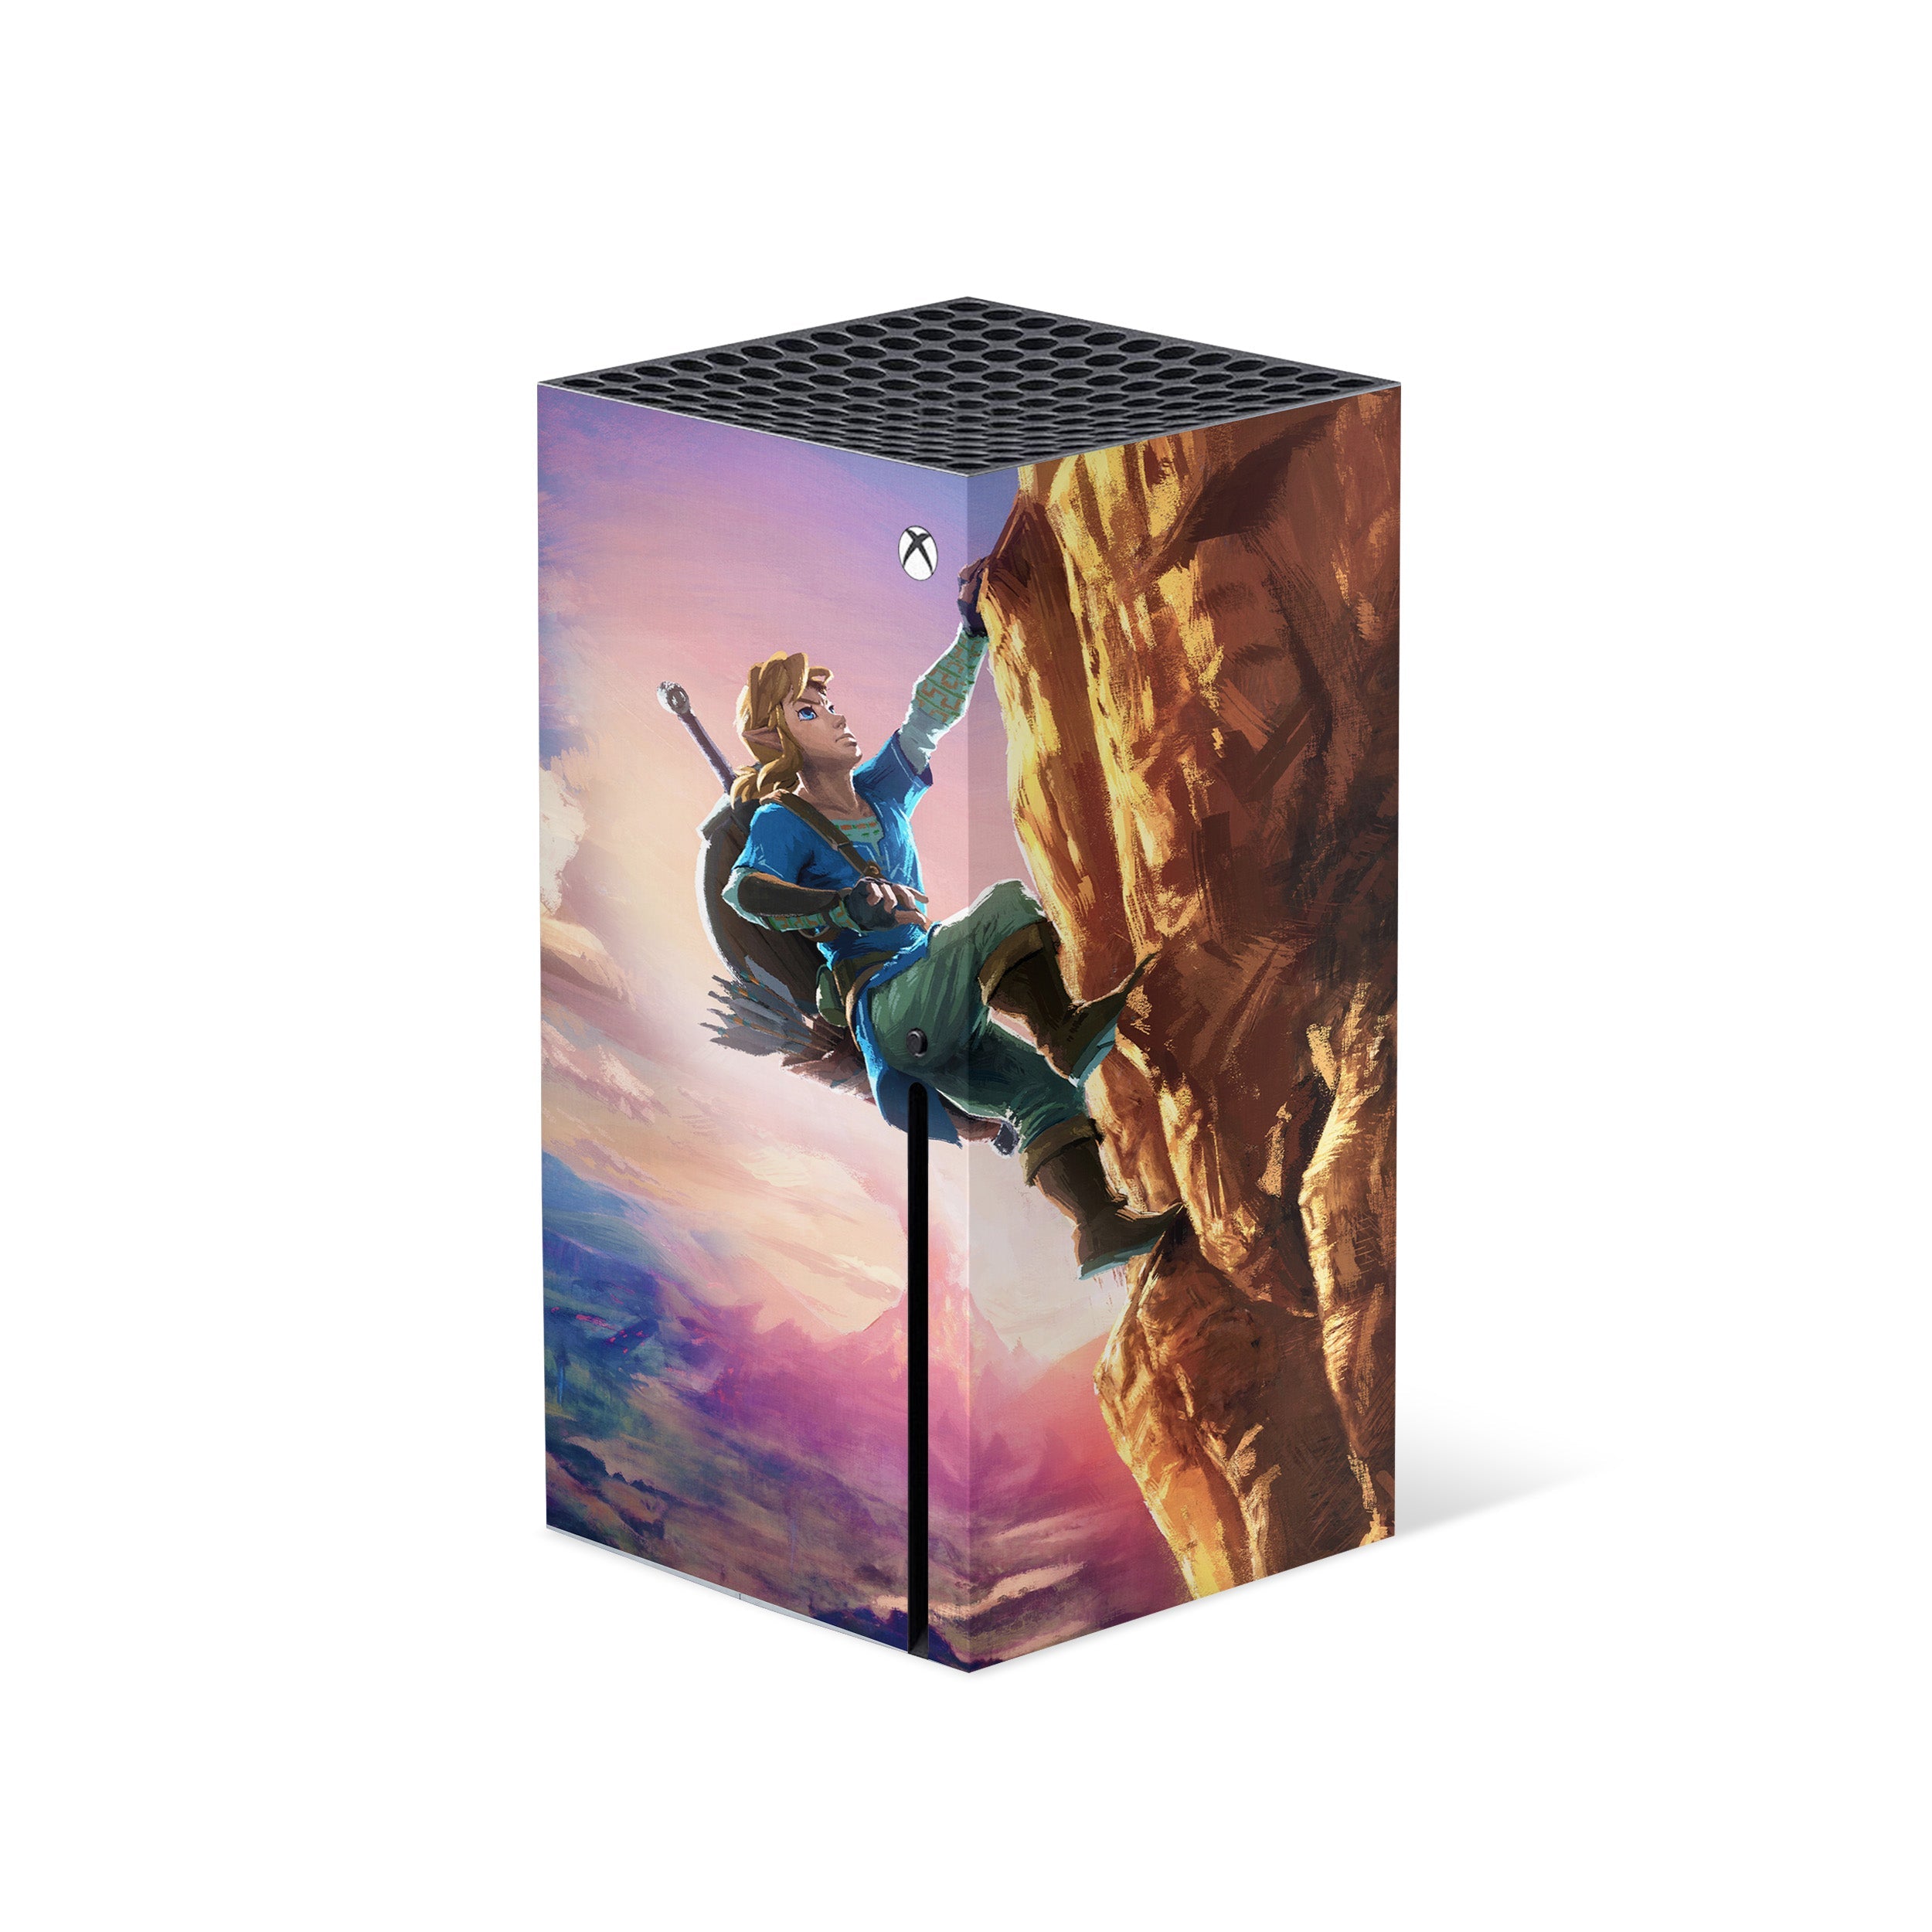 A video game skin featuring a Zelda design for the Xbox Series X.